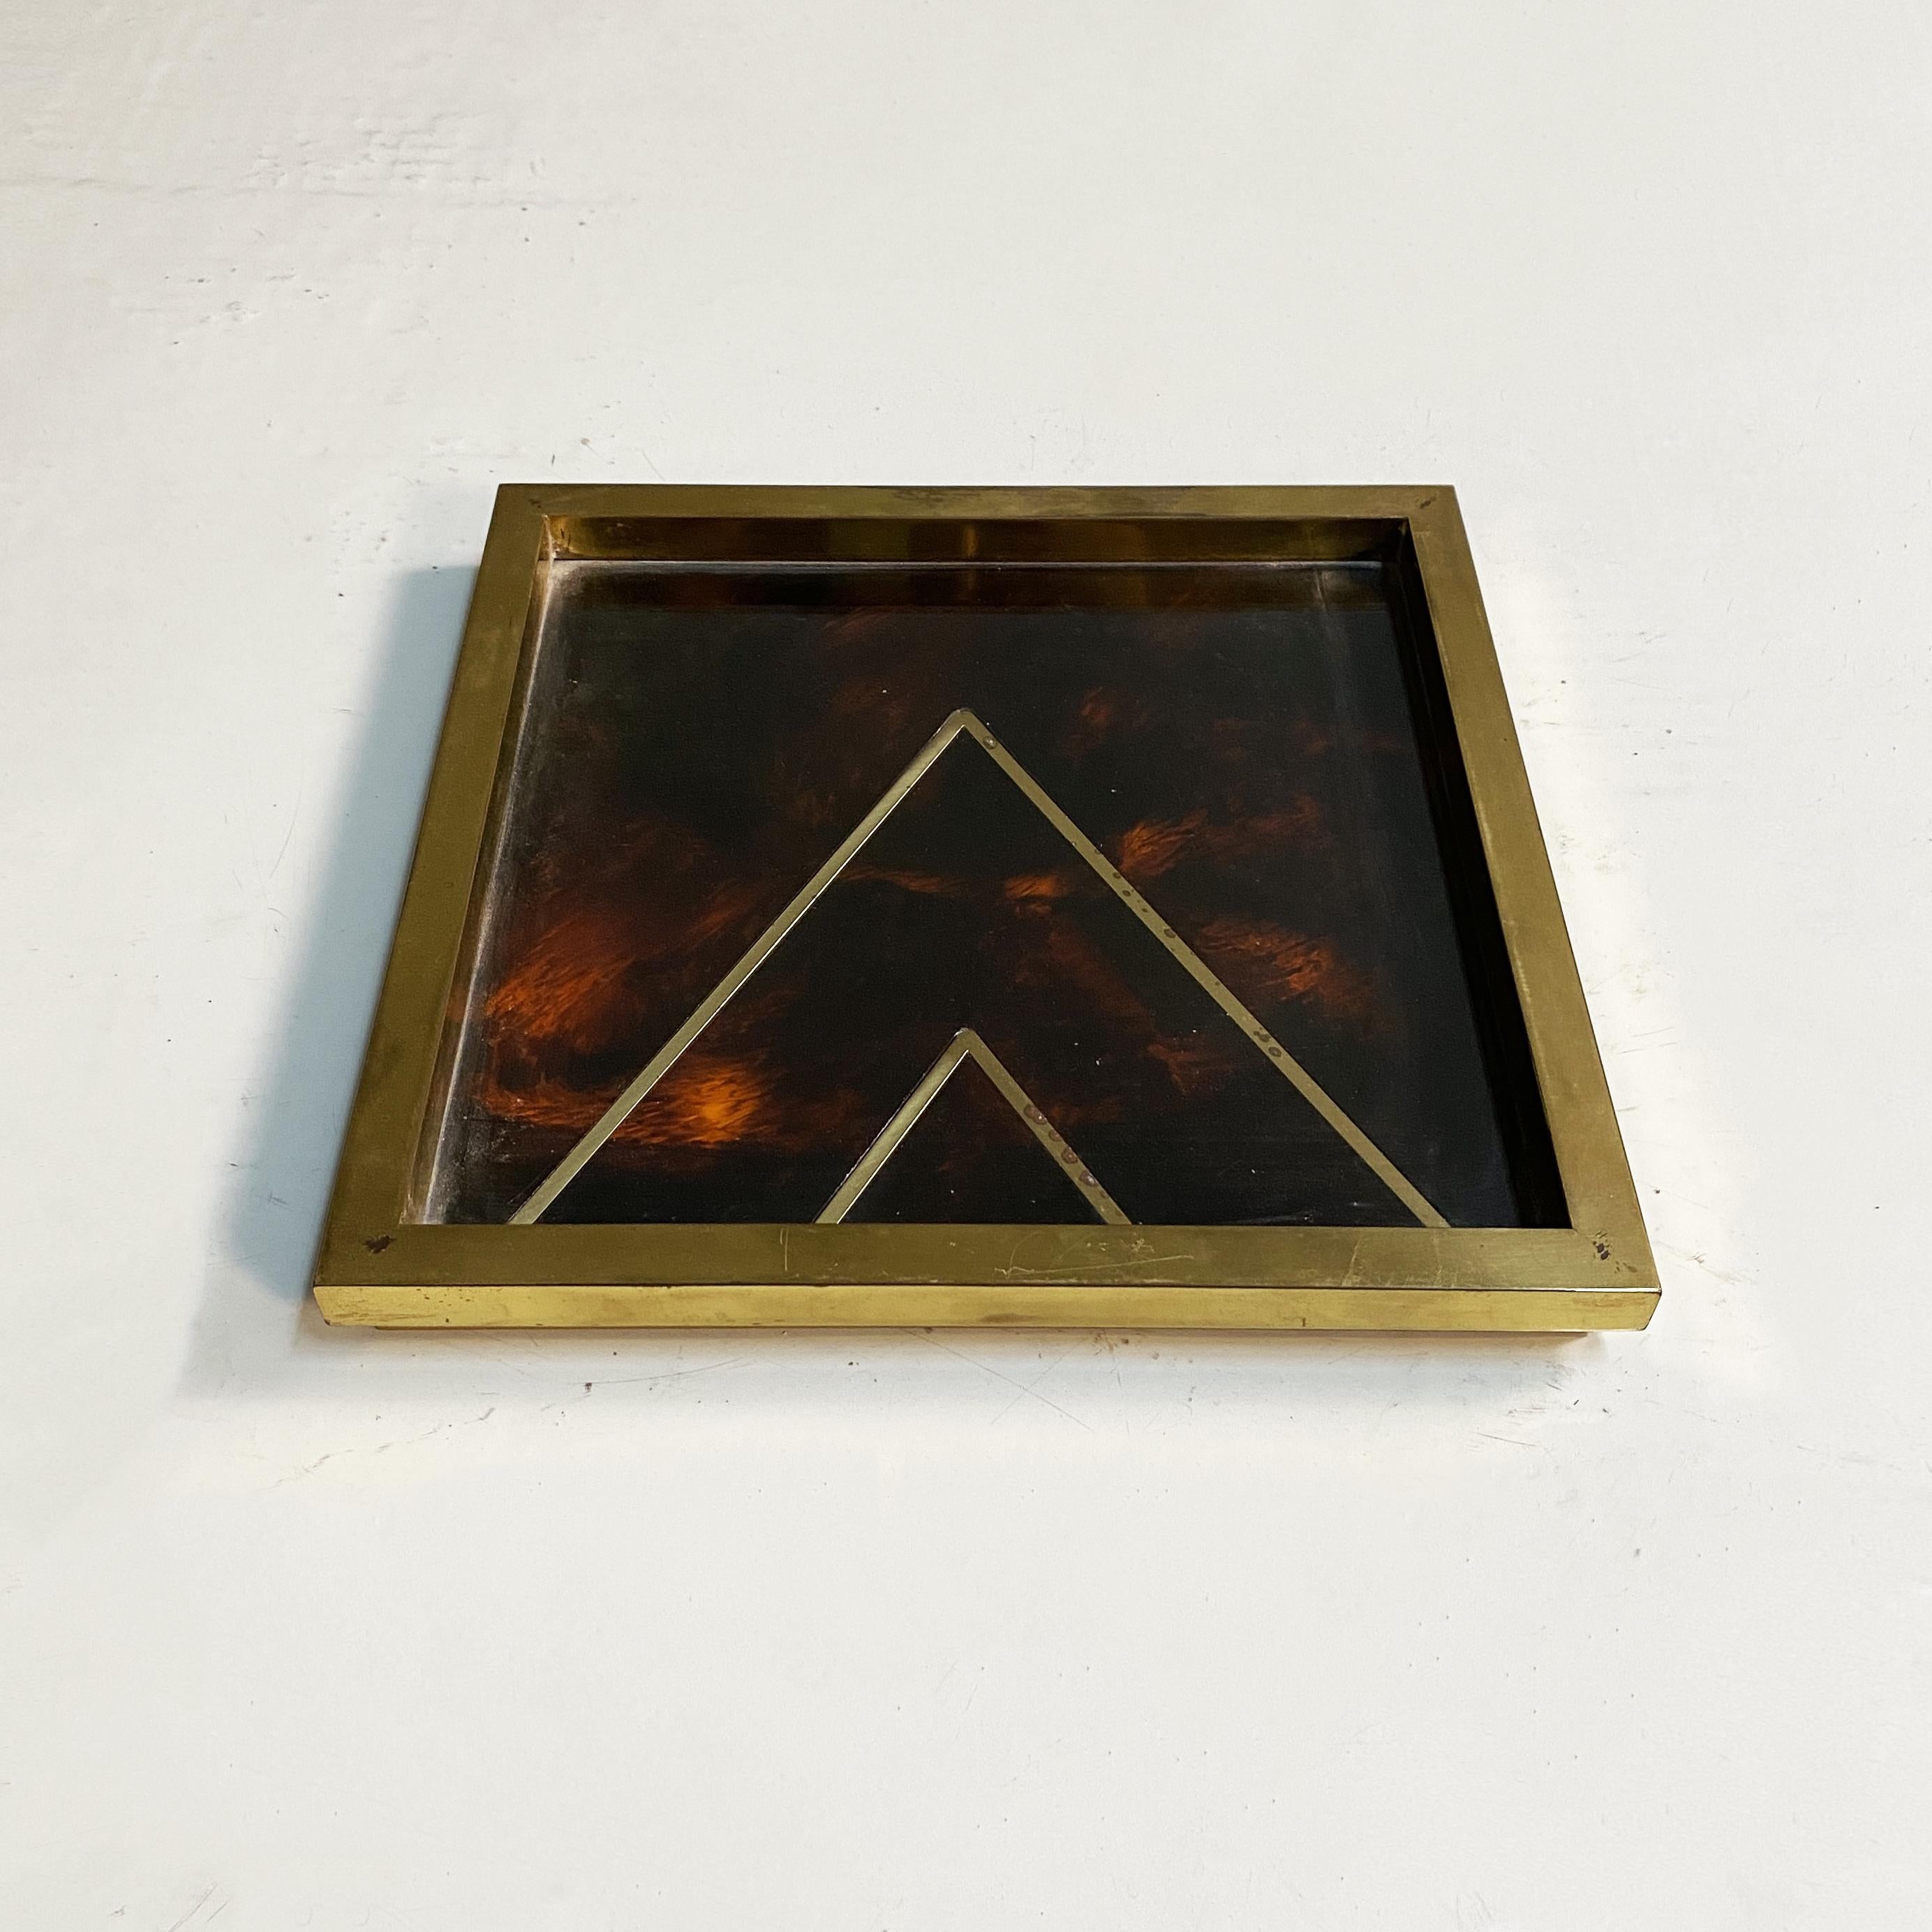 Late 20th Century Mid-Century Modern Square Brass and Briar Effect Plexiglass Object Holder, 1970s For Sale